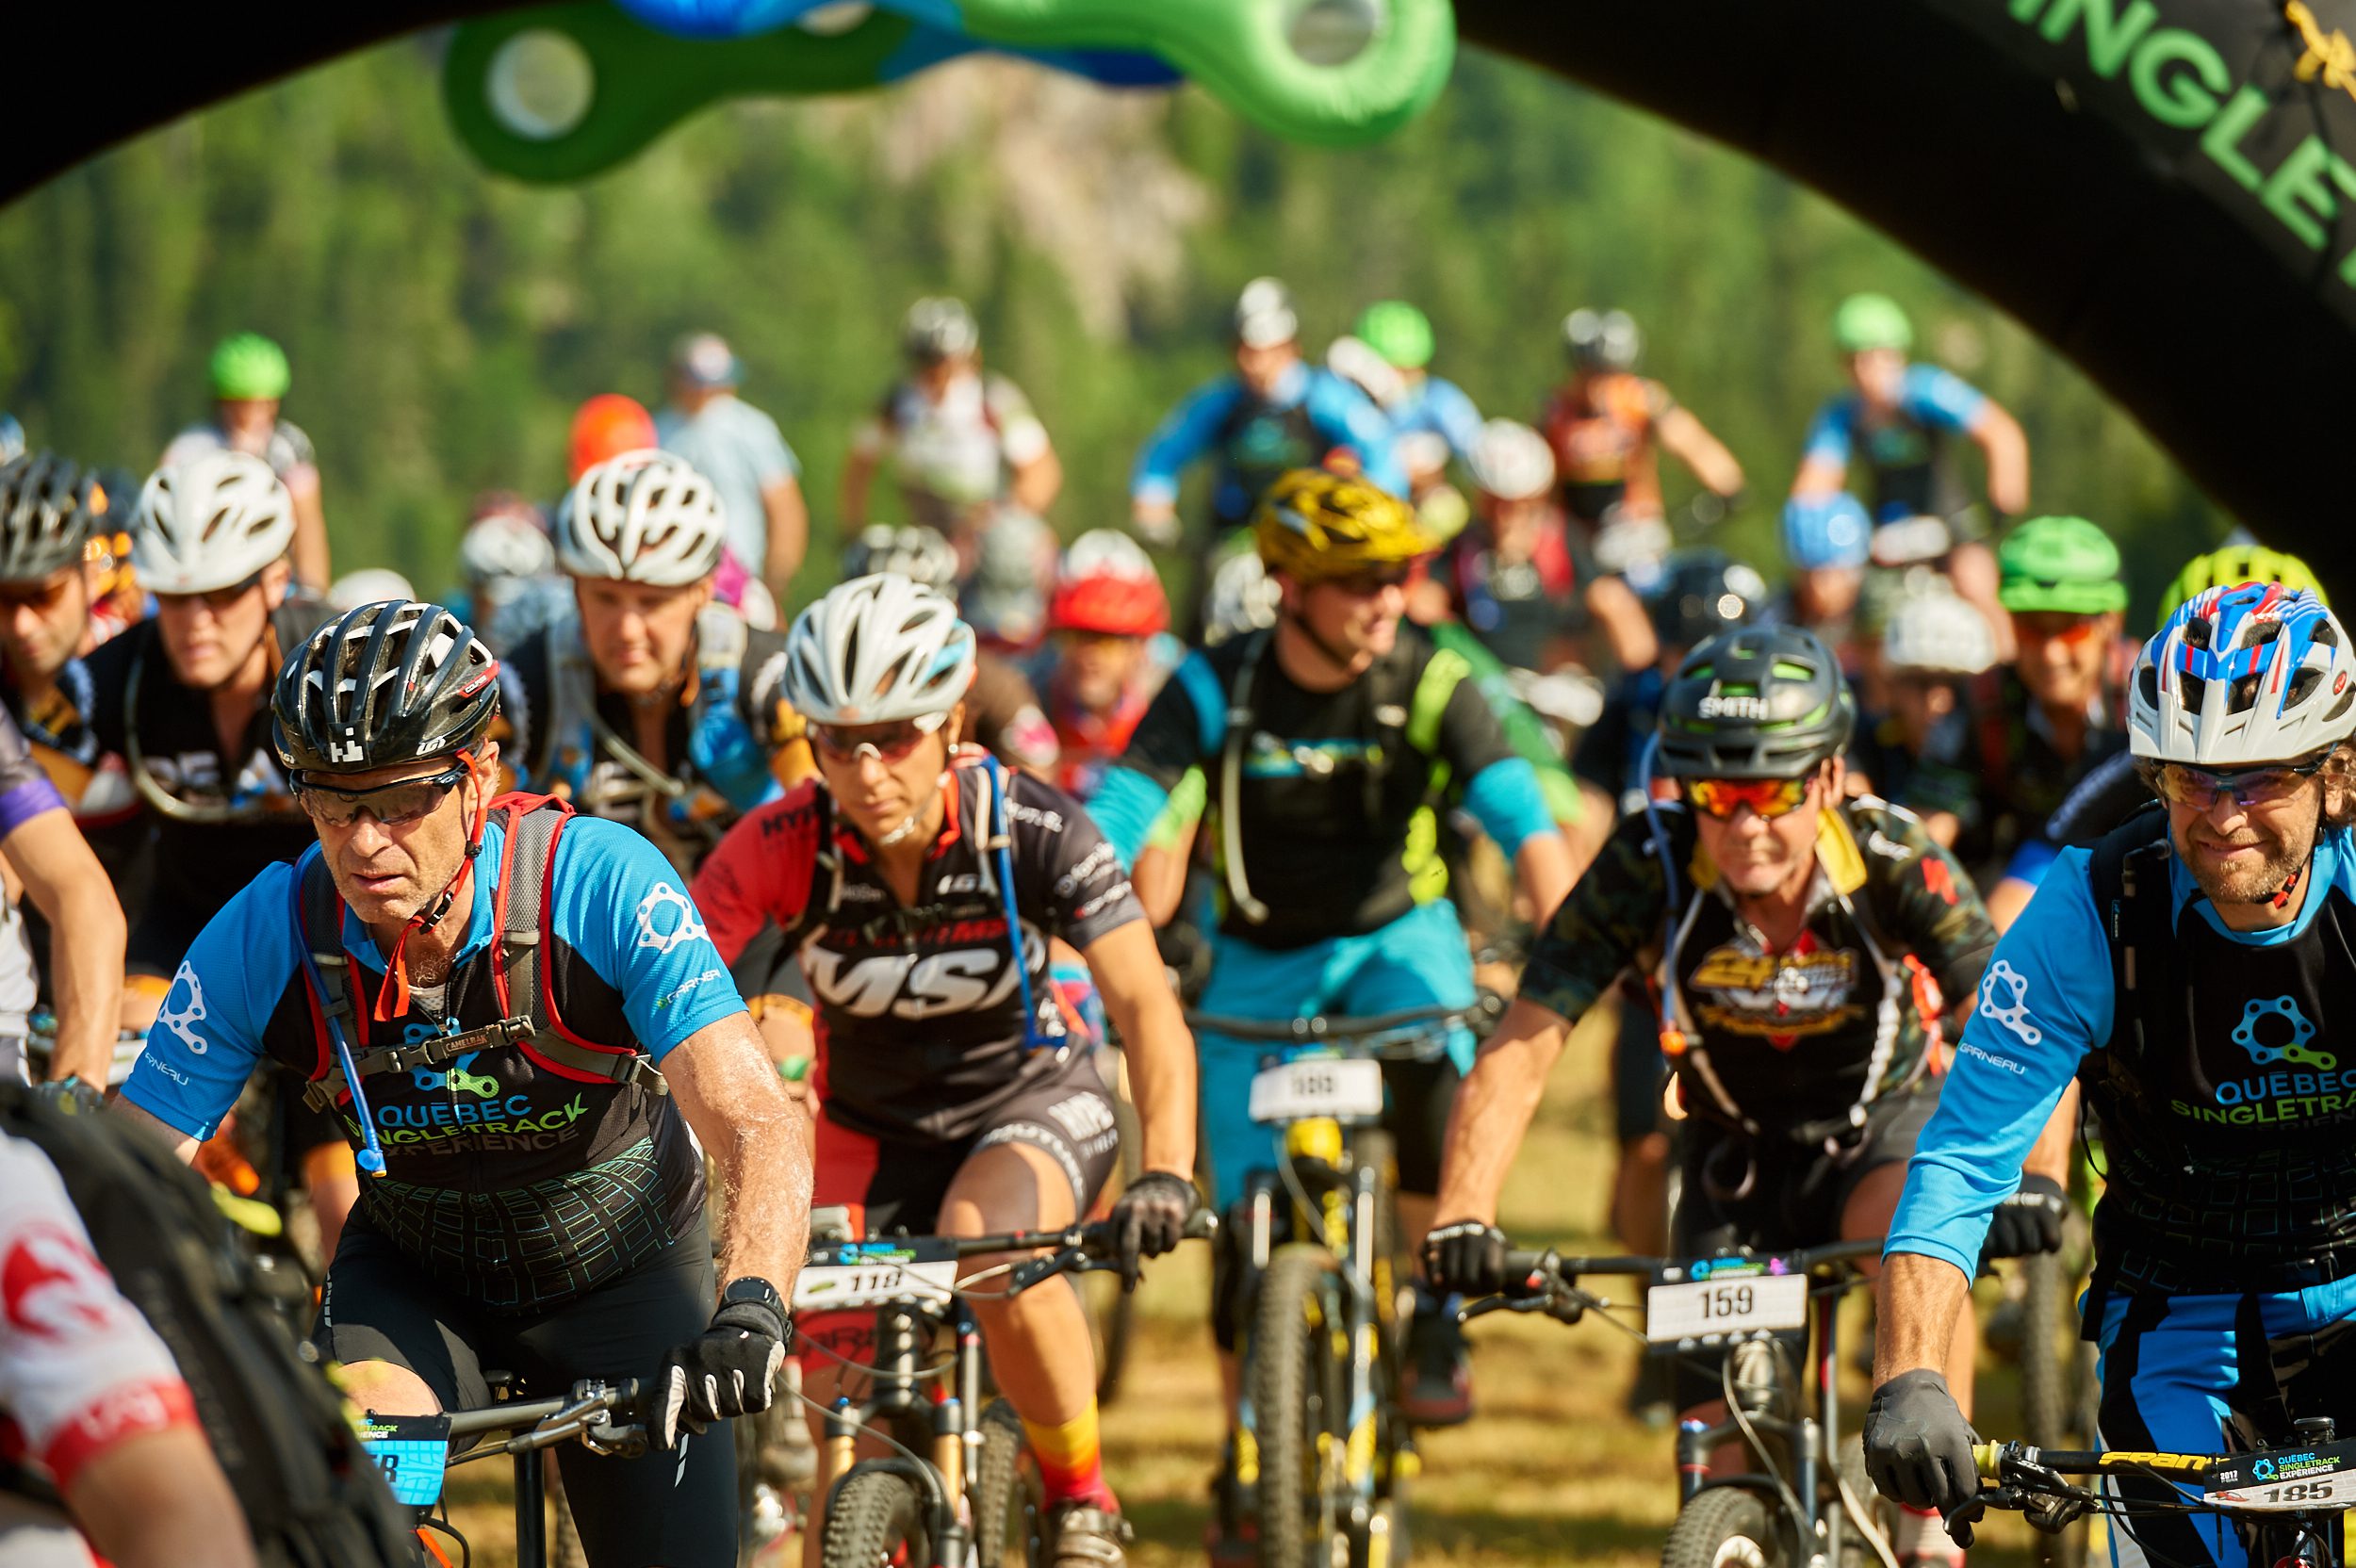 Crossing the start line at the Quebec Singletrack Experience. (Photo: Bear Cieri/QSE)